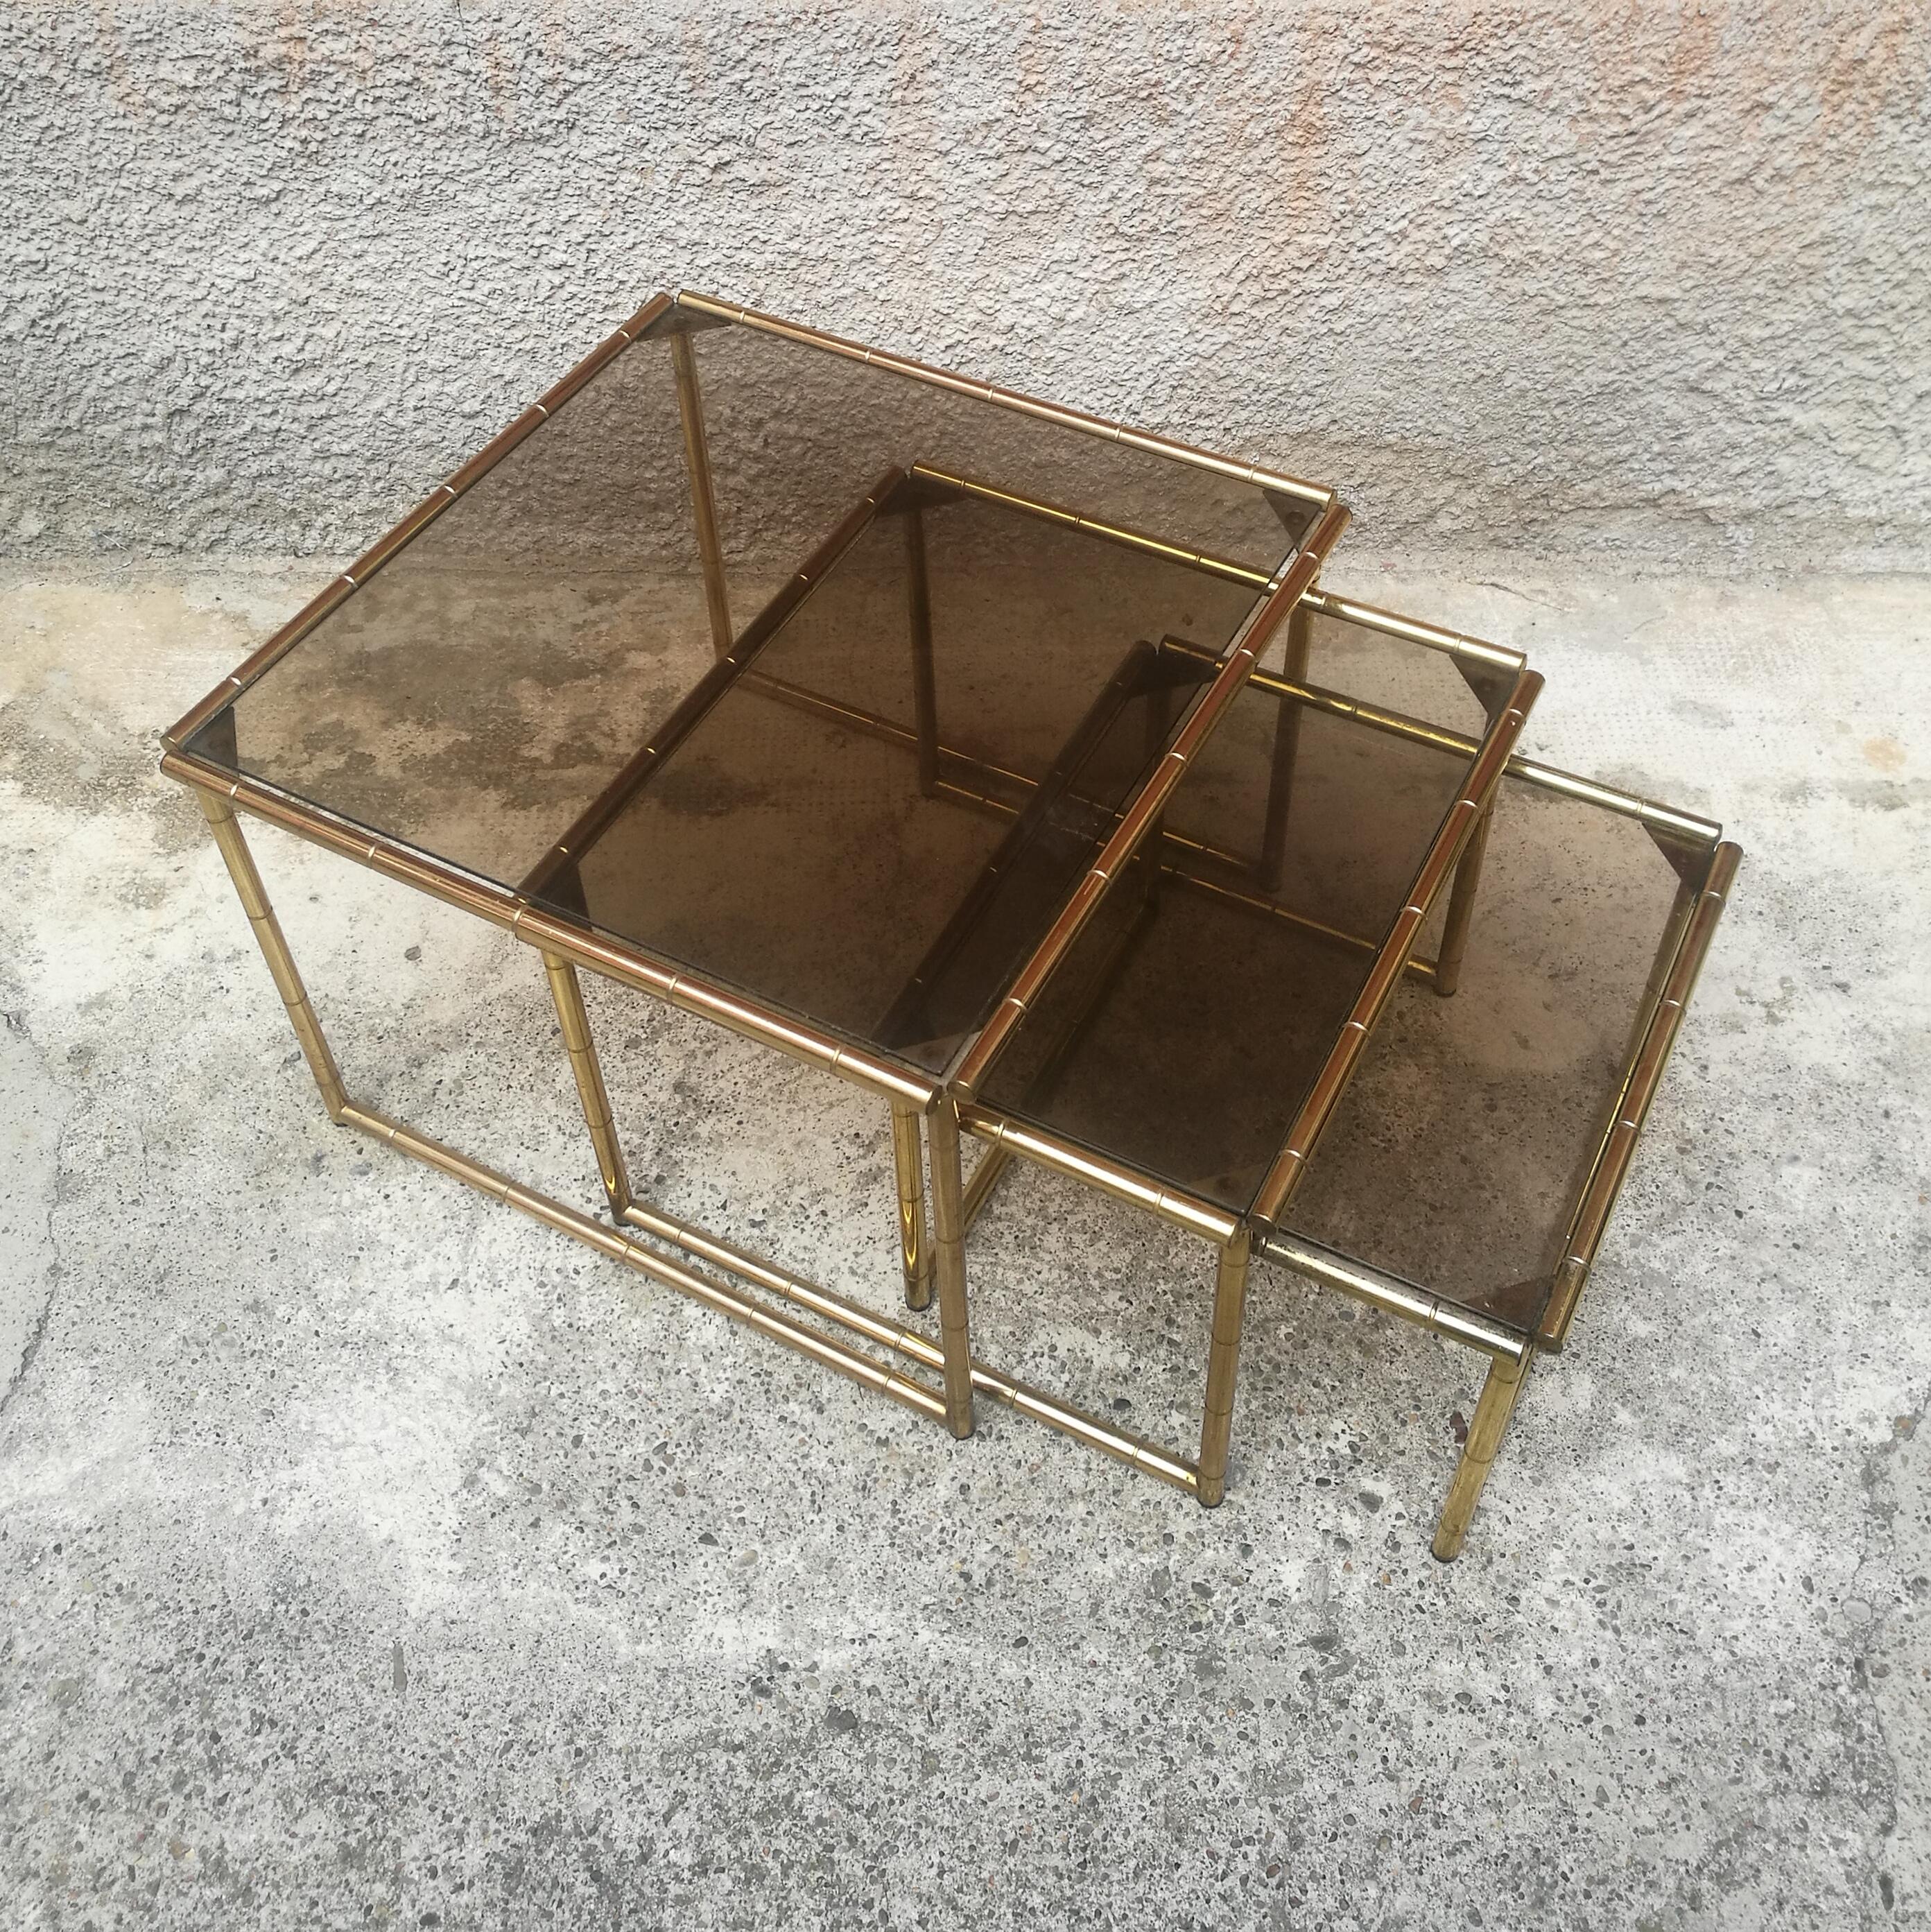 Italian golden metal coffee tables, 1970s
Coffee tables with golden metal frame and smoked glass
Perfect conditions.